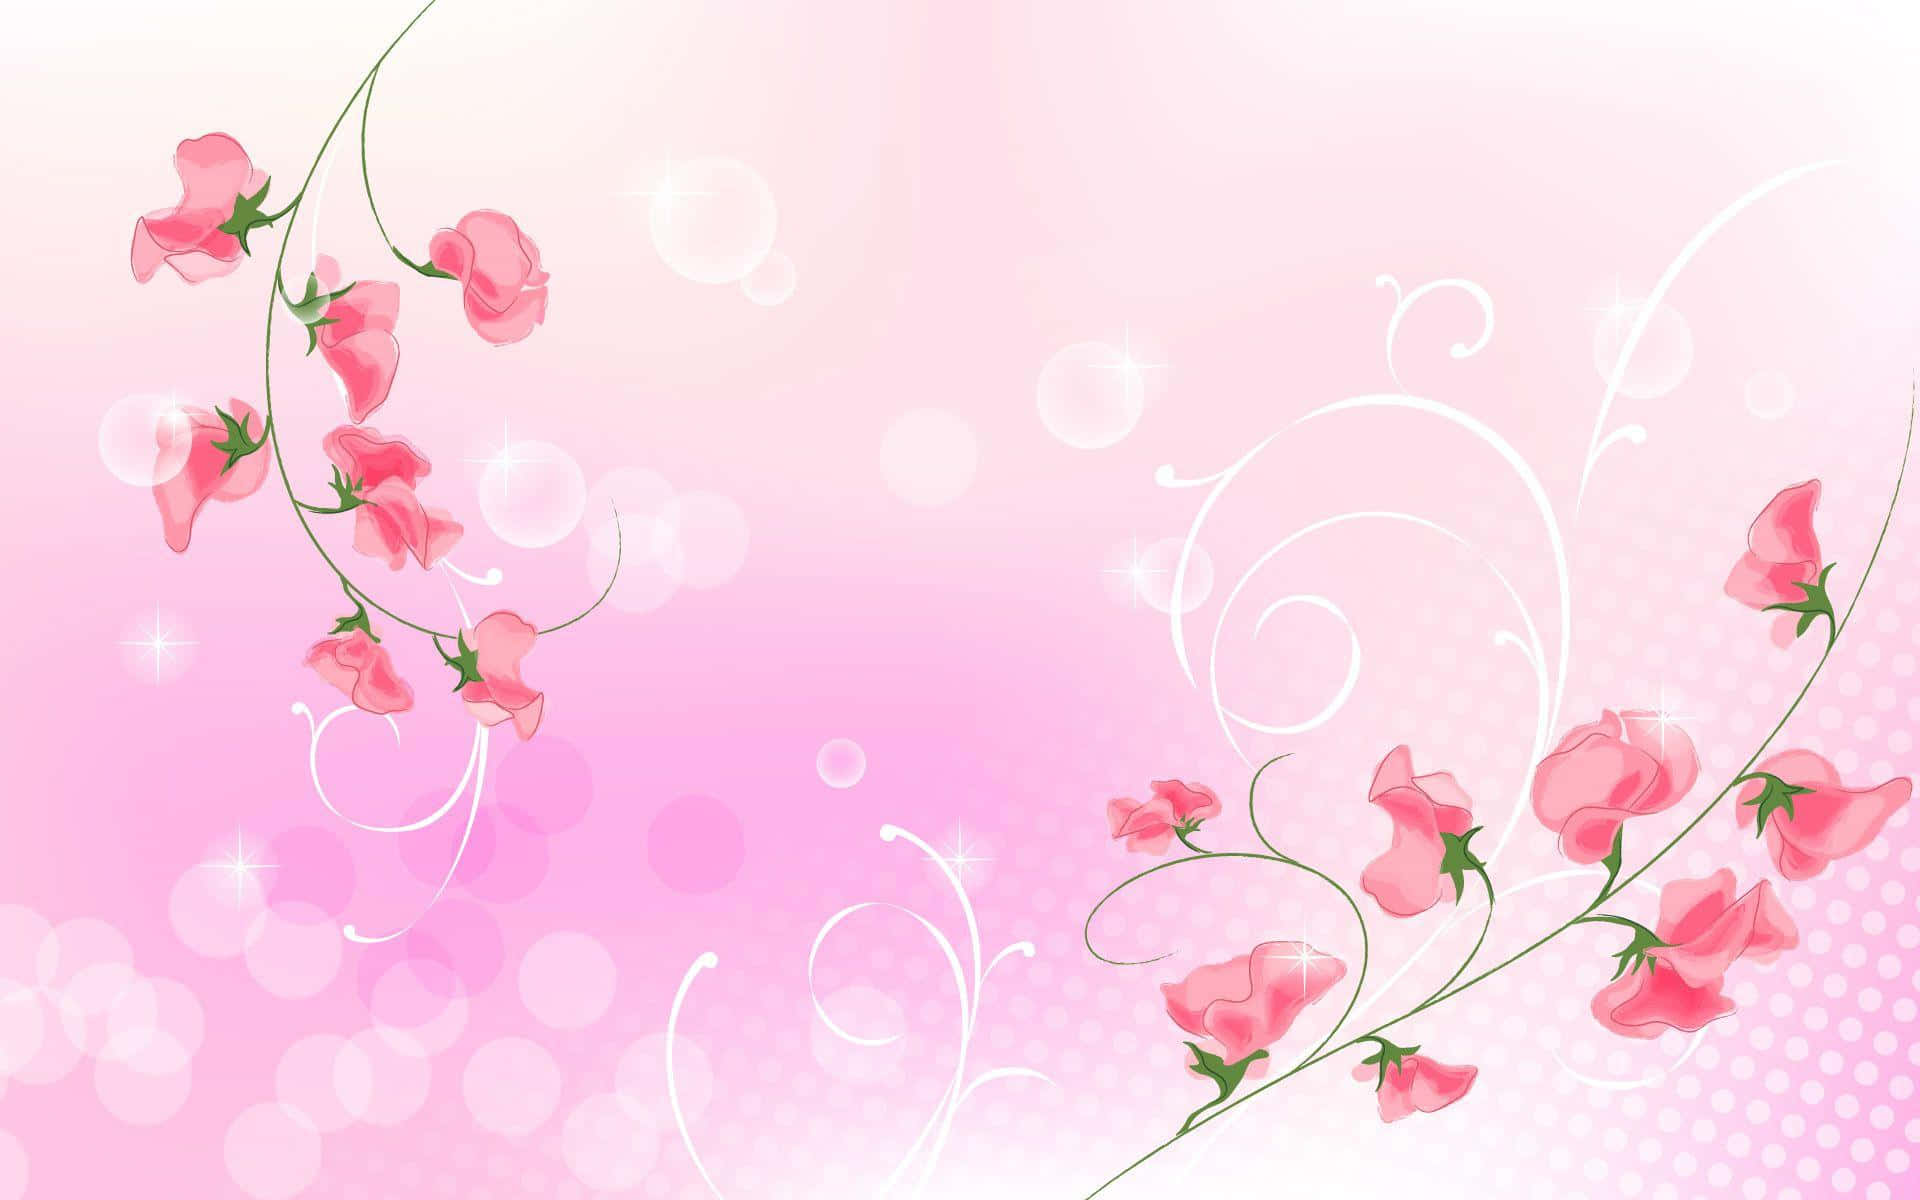 A delicate pink floral background, perfect for accenting any wall.